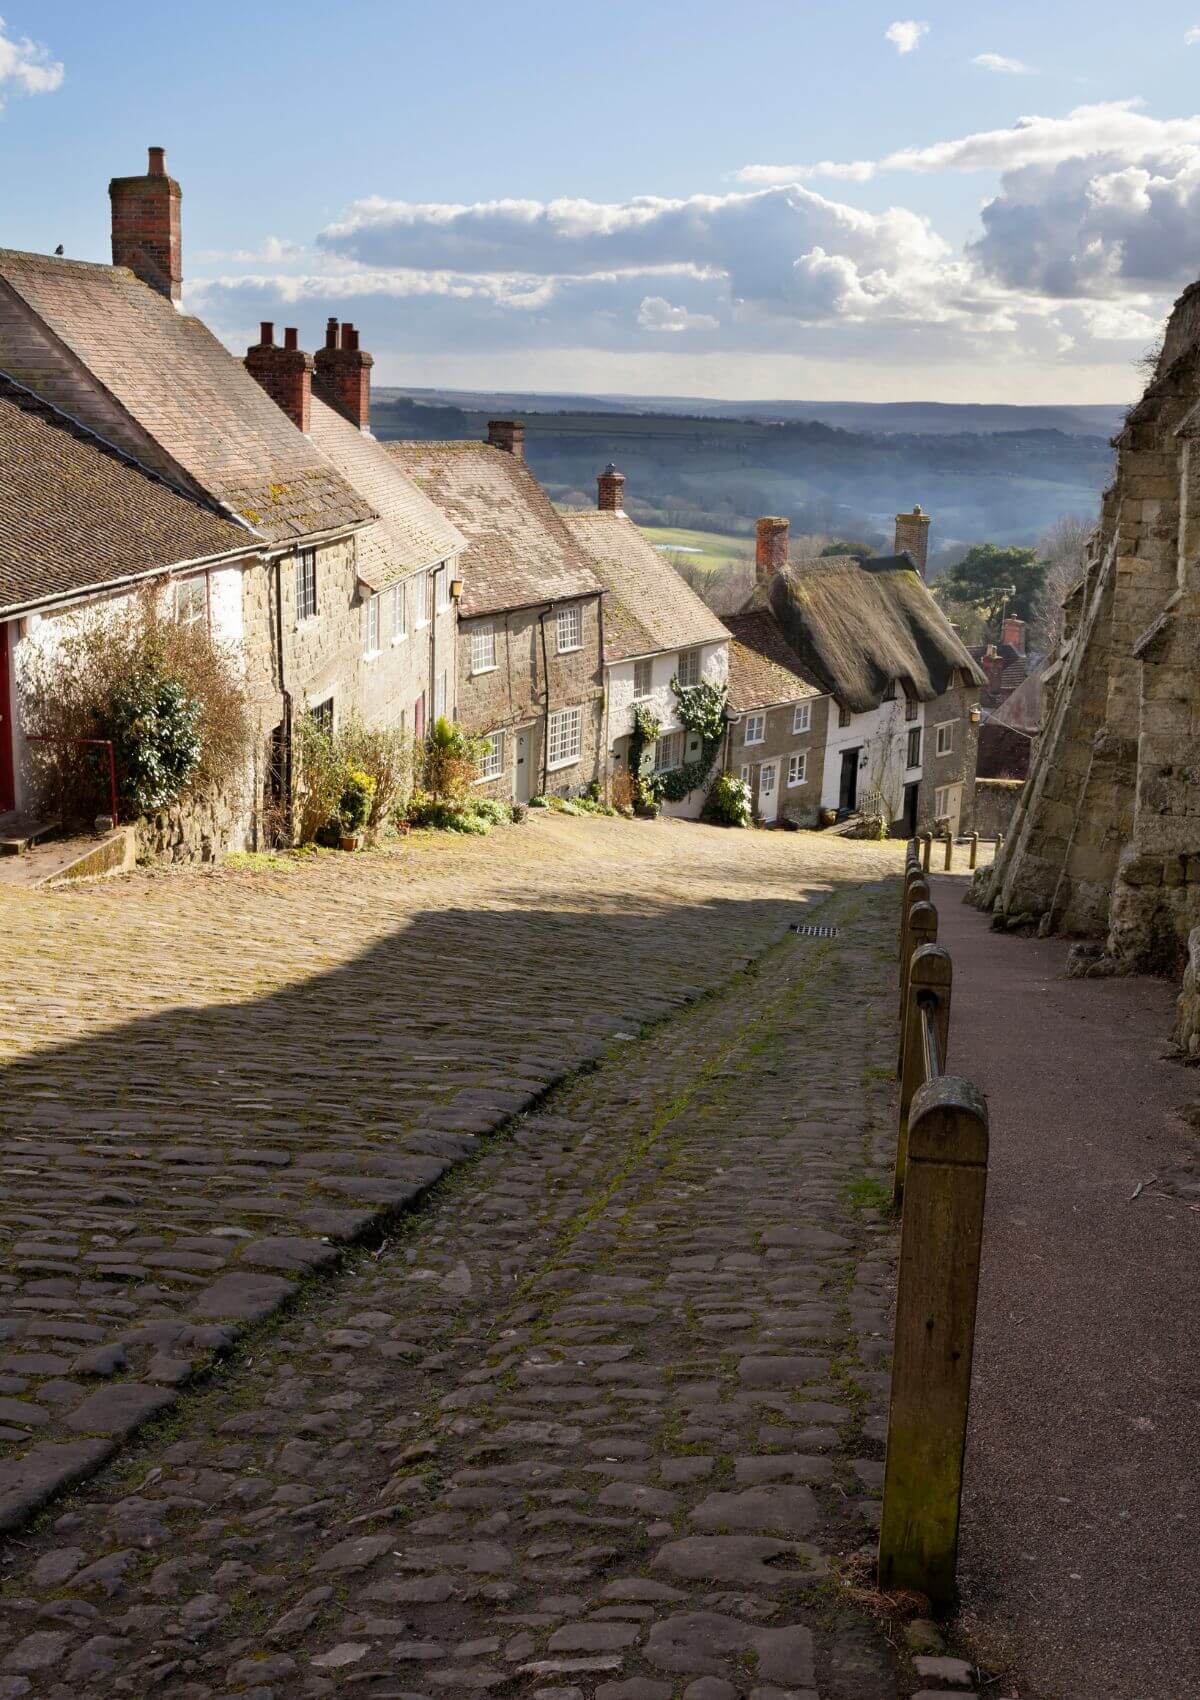 Gold Hill in the interesting town of Shaftesbury, England